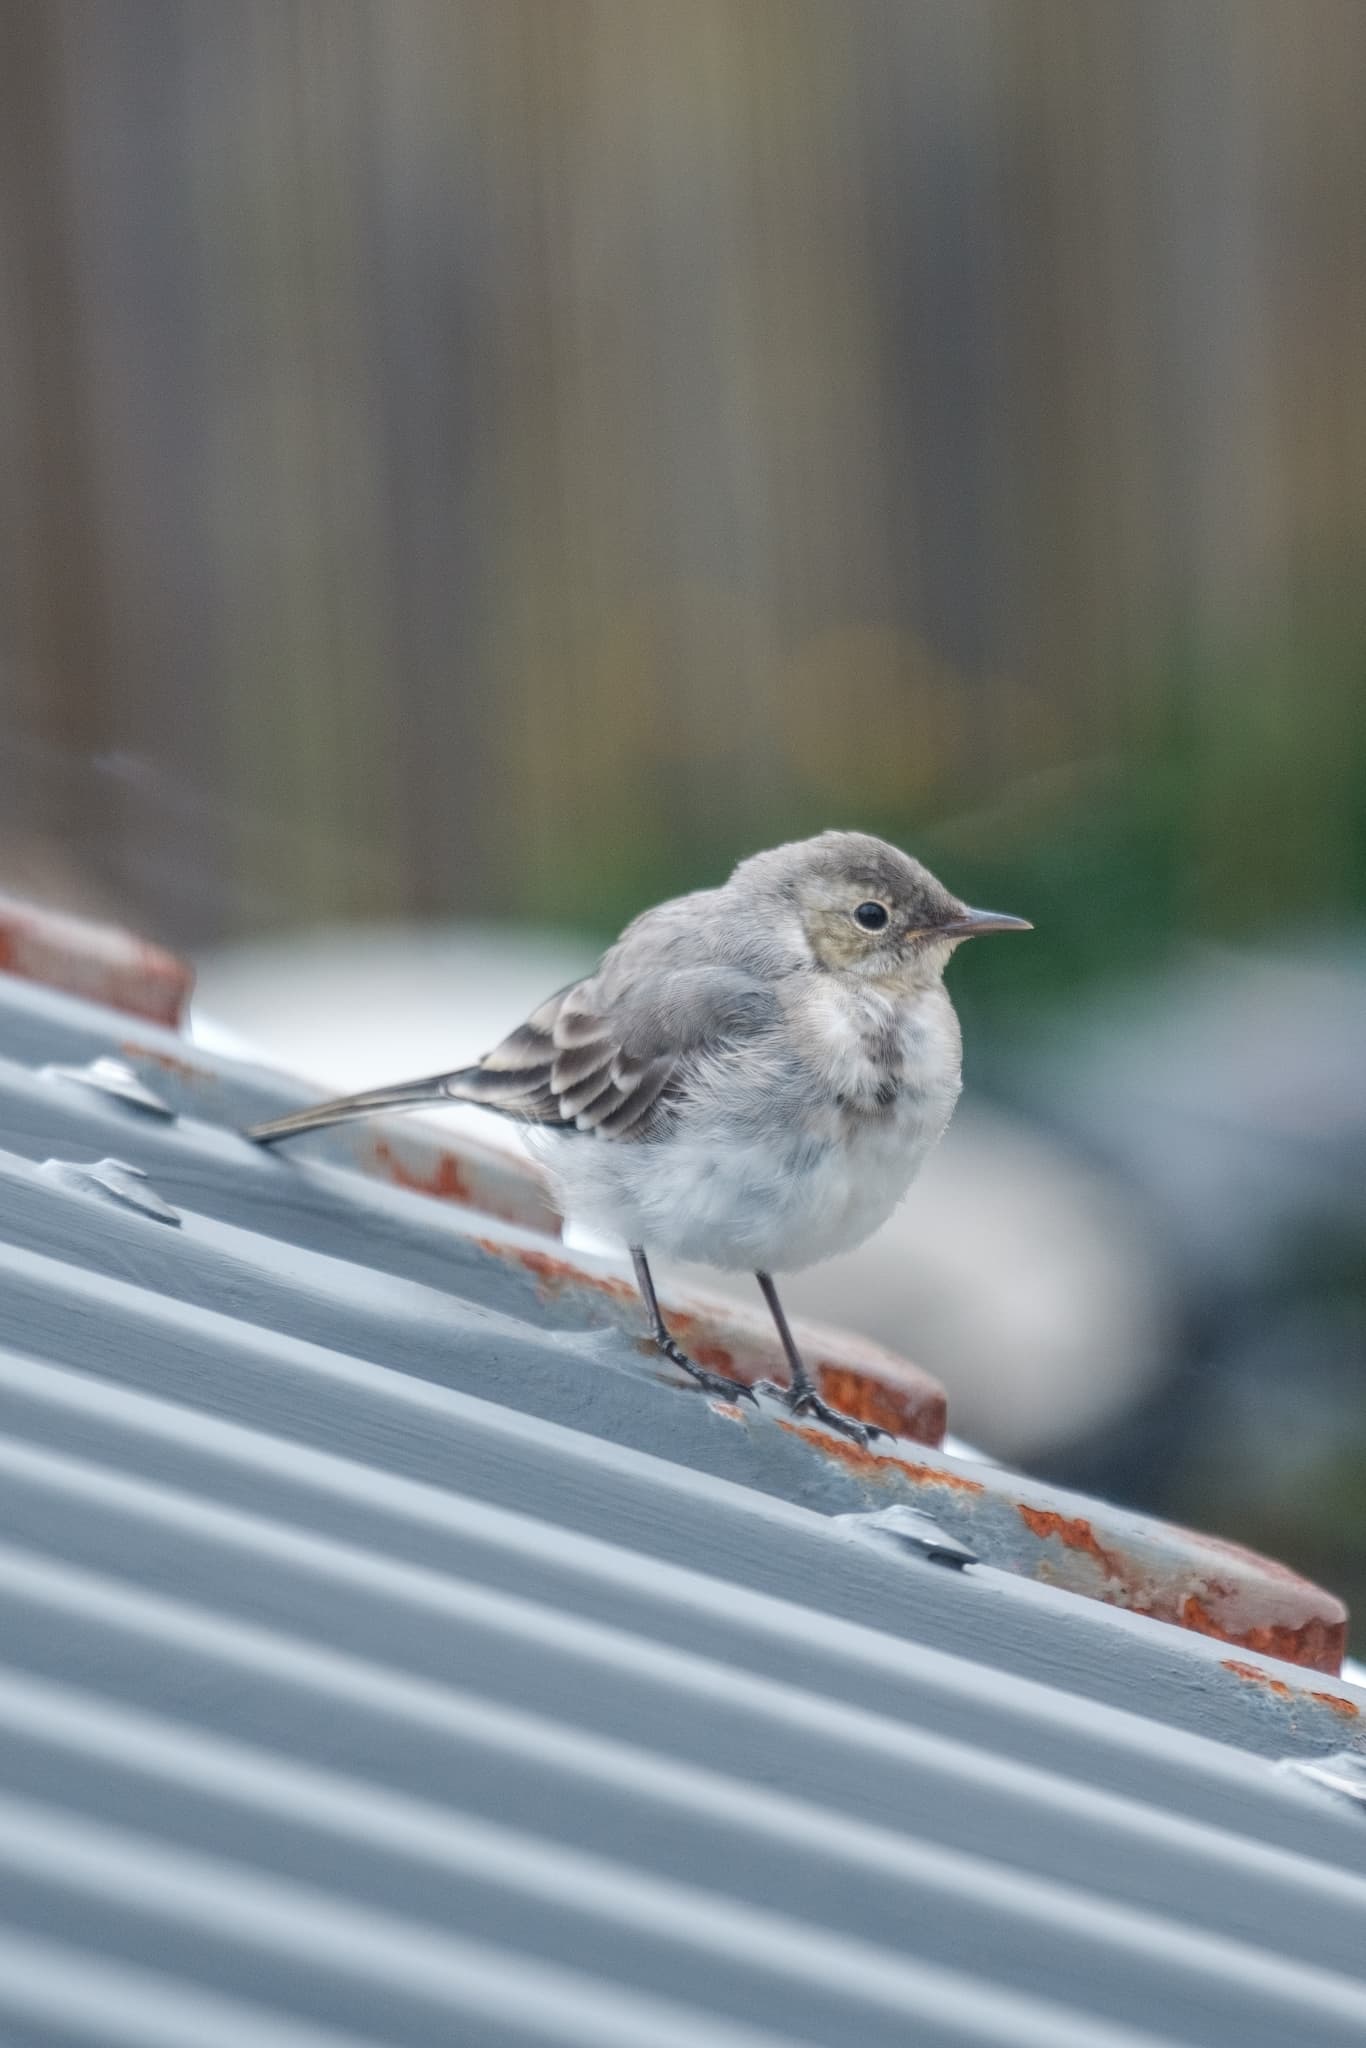 A bird that is a little ball of fluff stands on a rooftop and looks at the photographer.